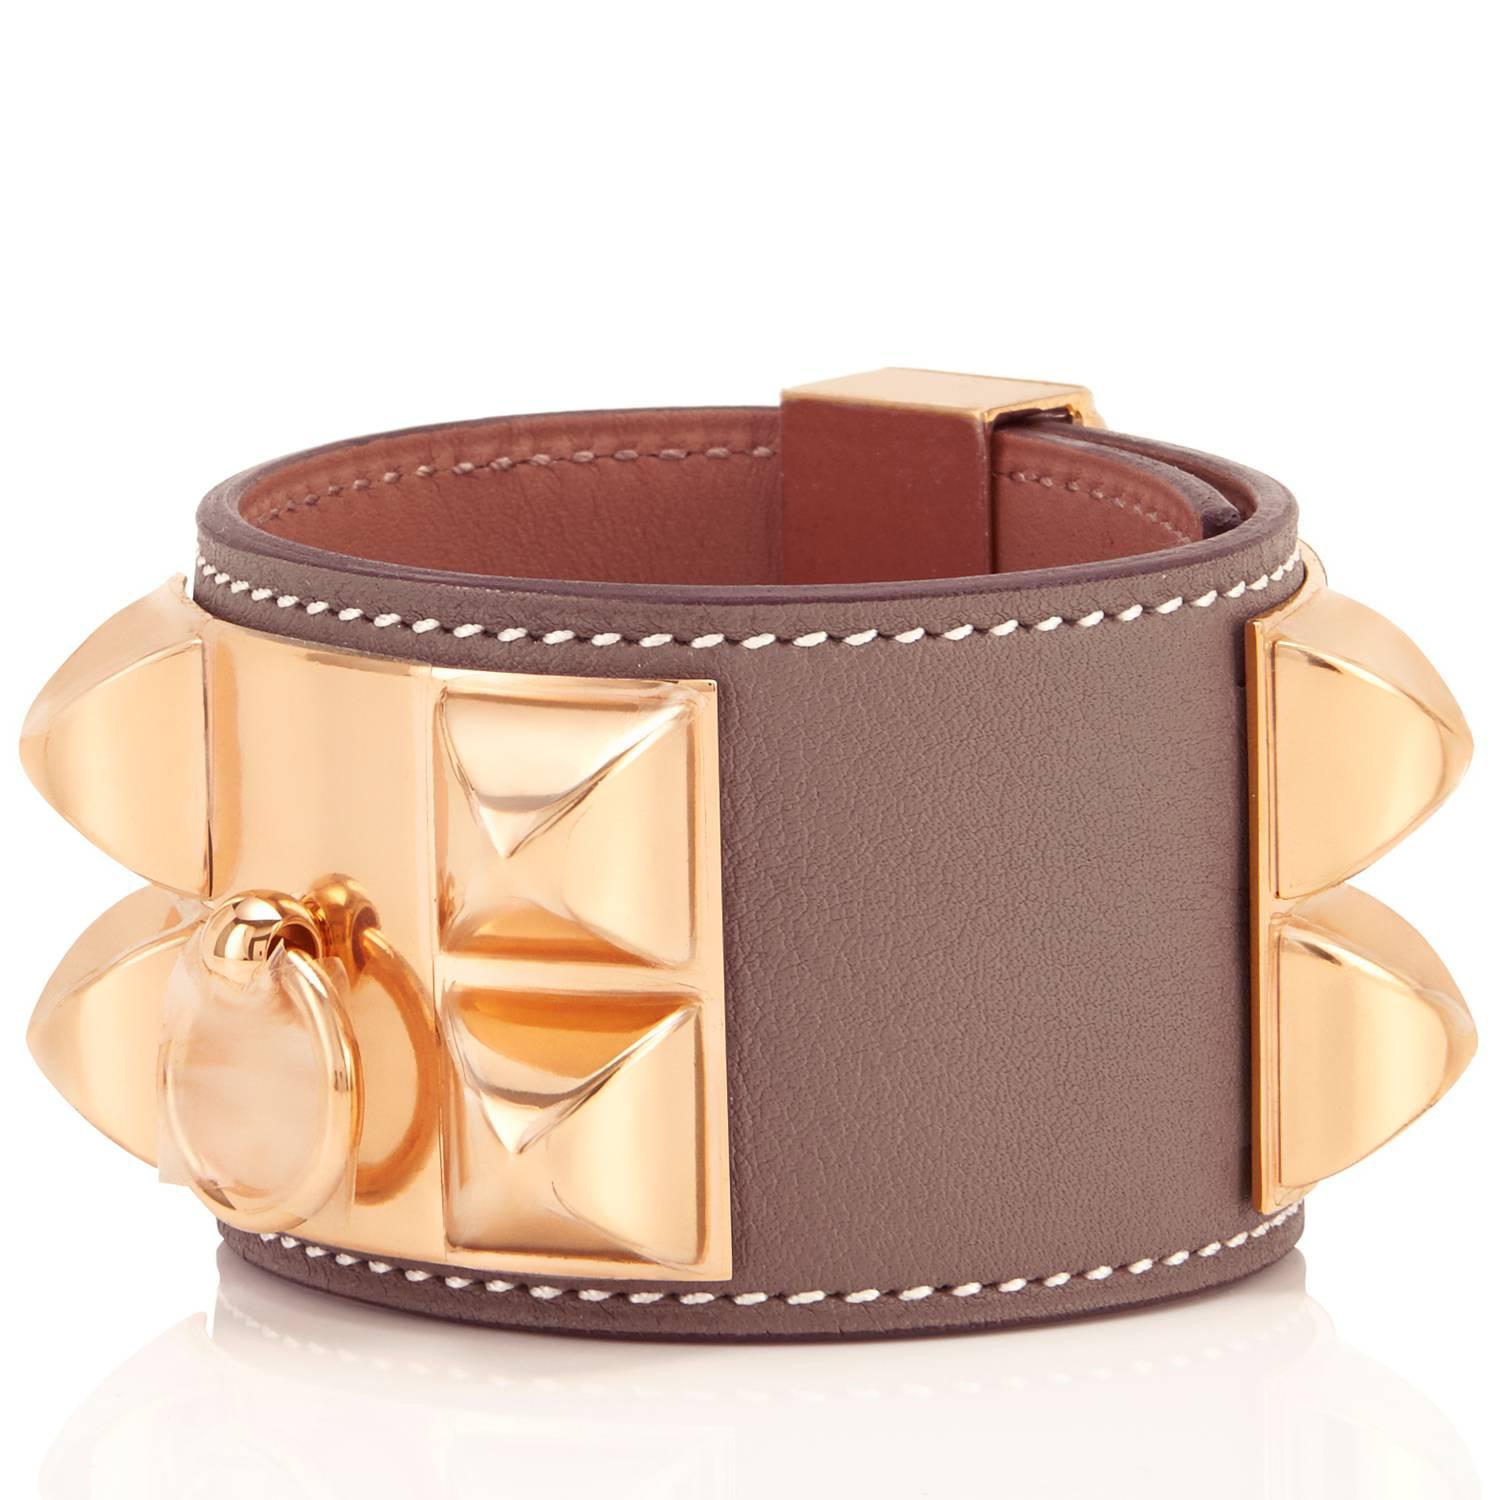 Hermes Etoupe Collier de Chien CDC Cuff Bracelet Taupe Rose Gold Hardware
DIVINE!  Etoupe with Rose Gold is new and an absolutely fabulous combination!
Brand new in box.  Store fresh coming with velvet pouch and Hermes box.  
Lusciously PILLOWY